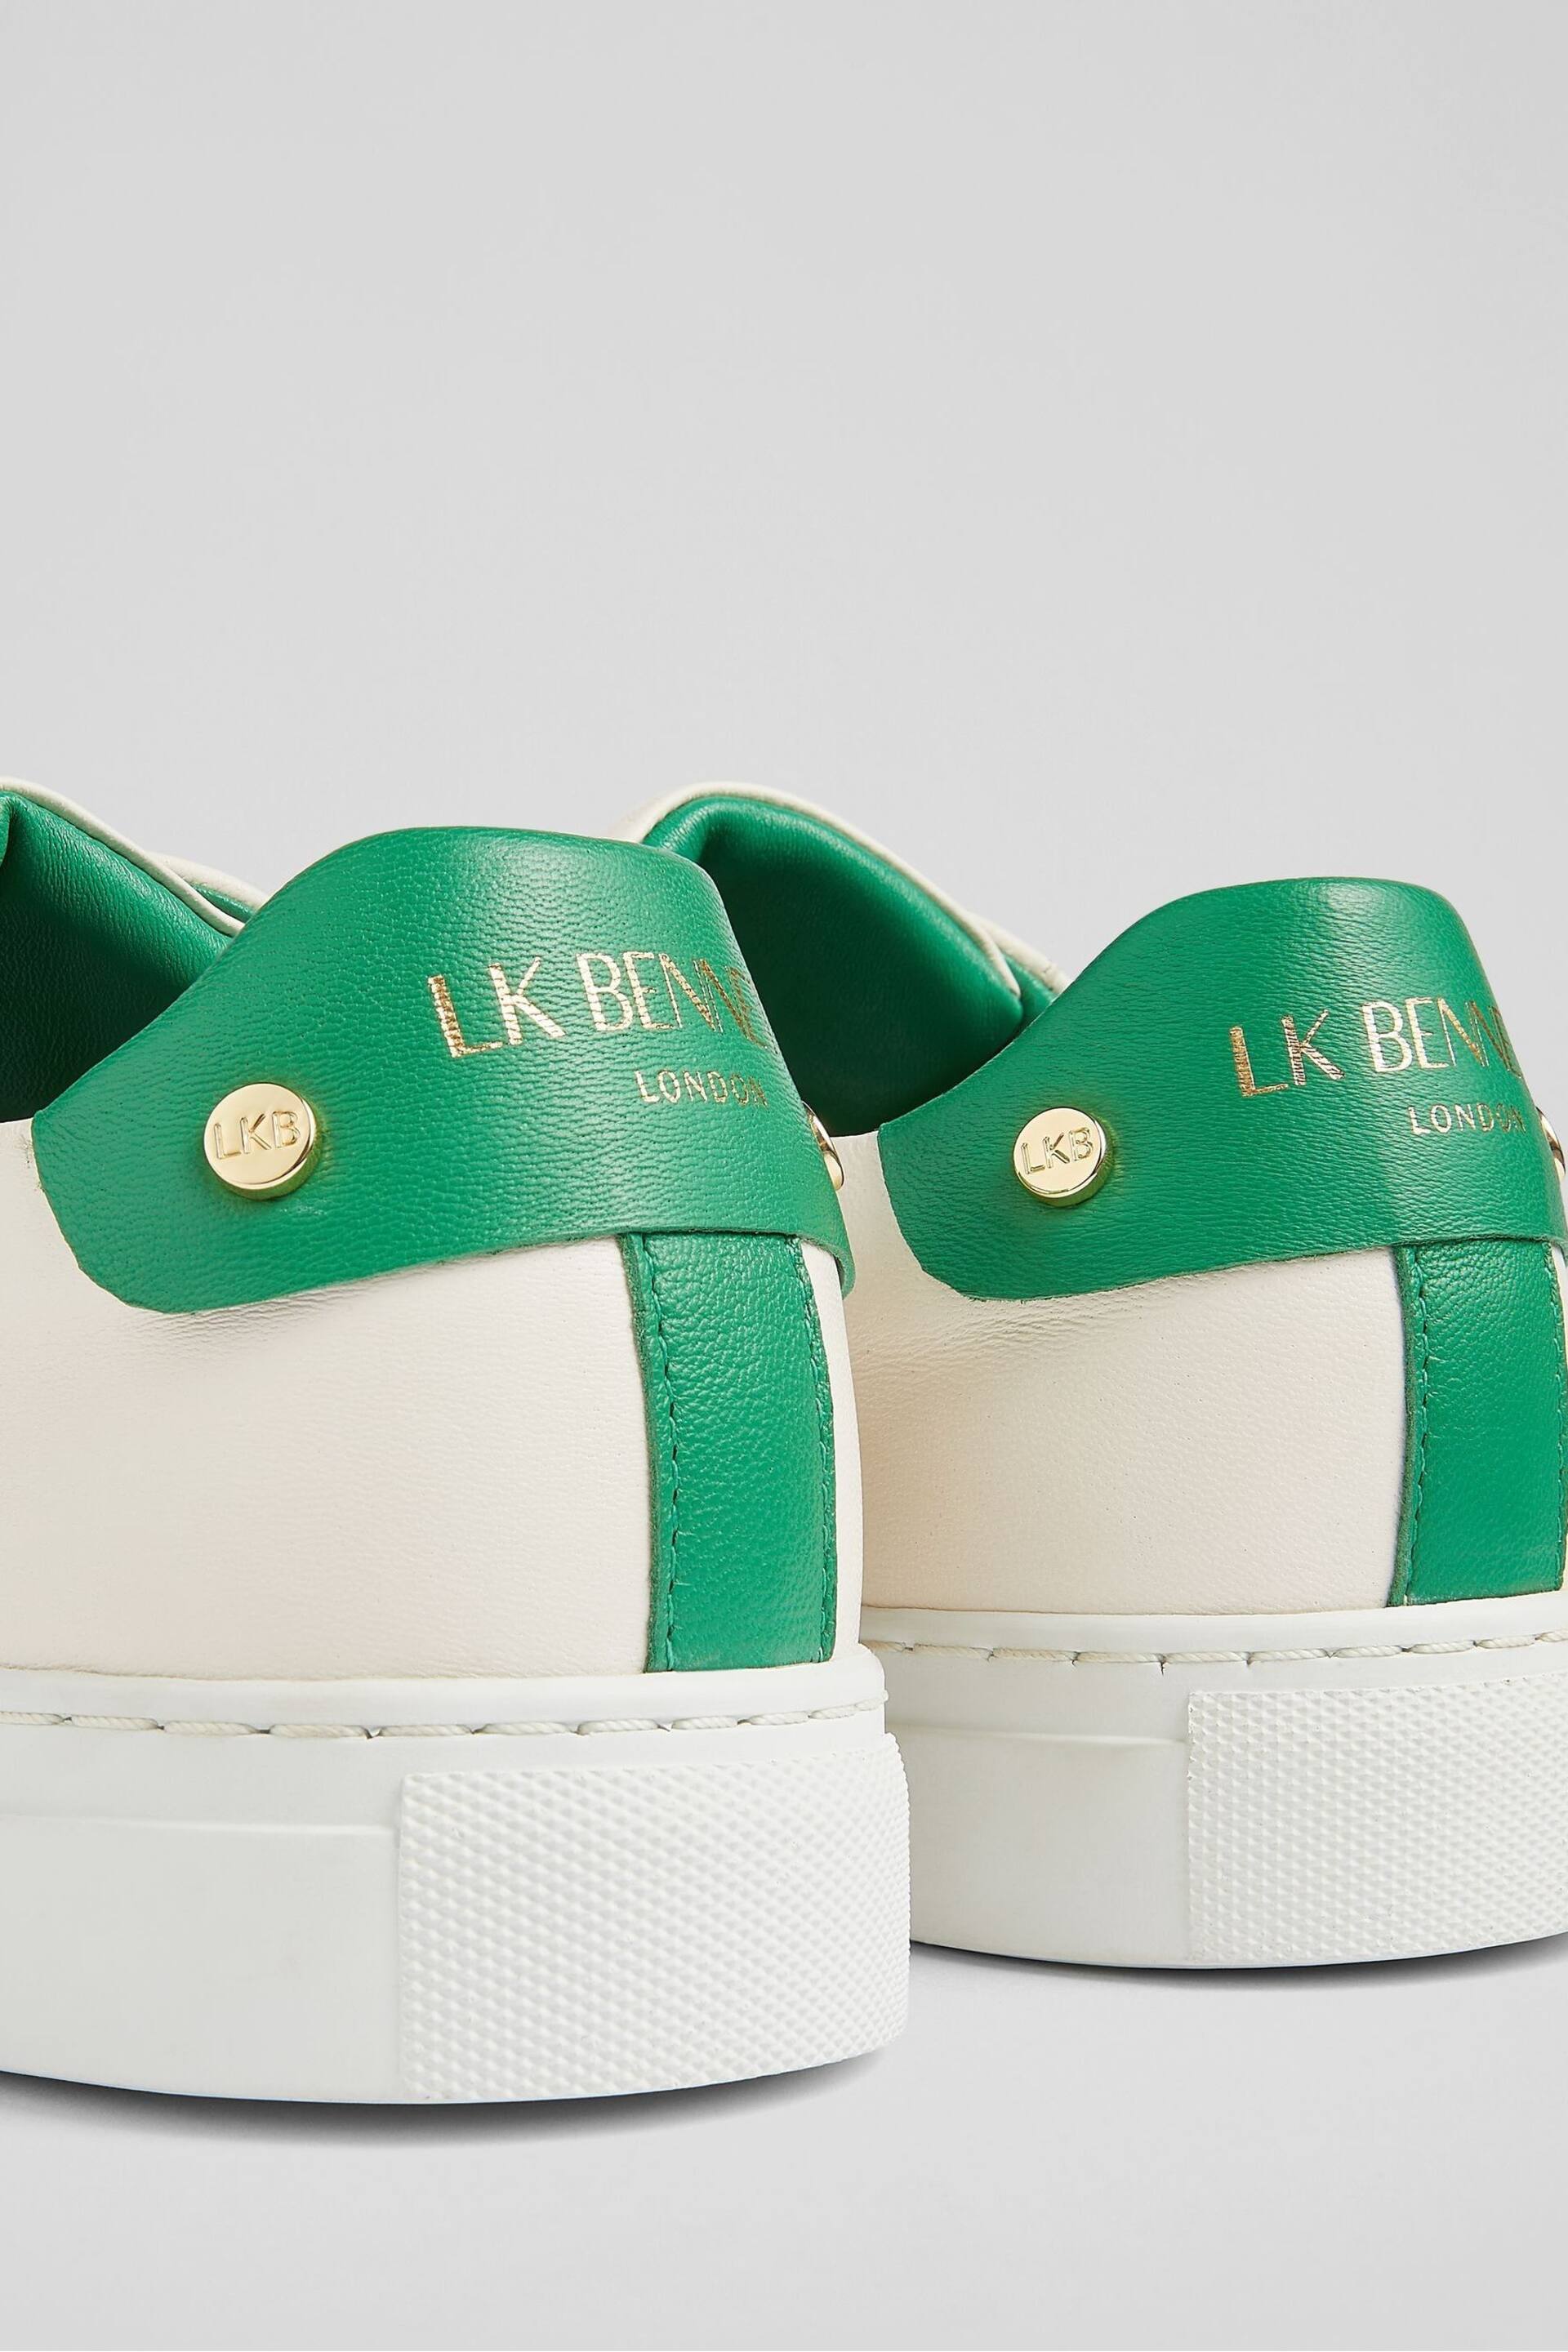 LK Bennett Signature Leather Trainers - Image 3 of 7